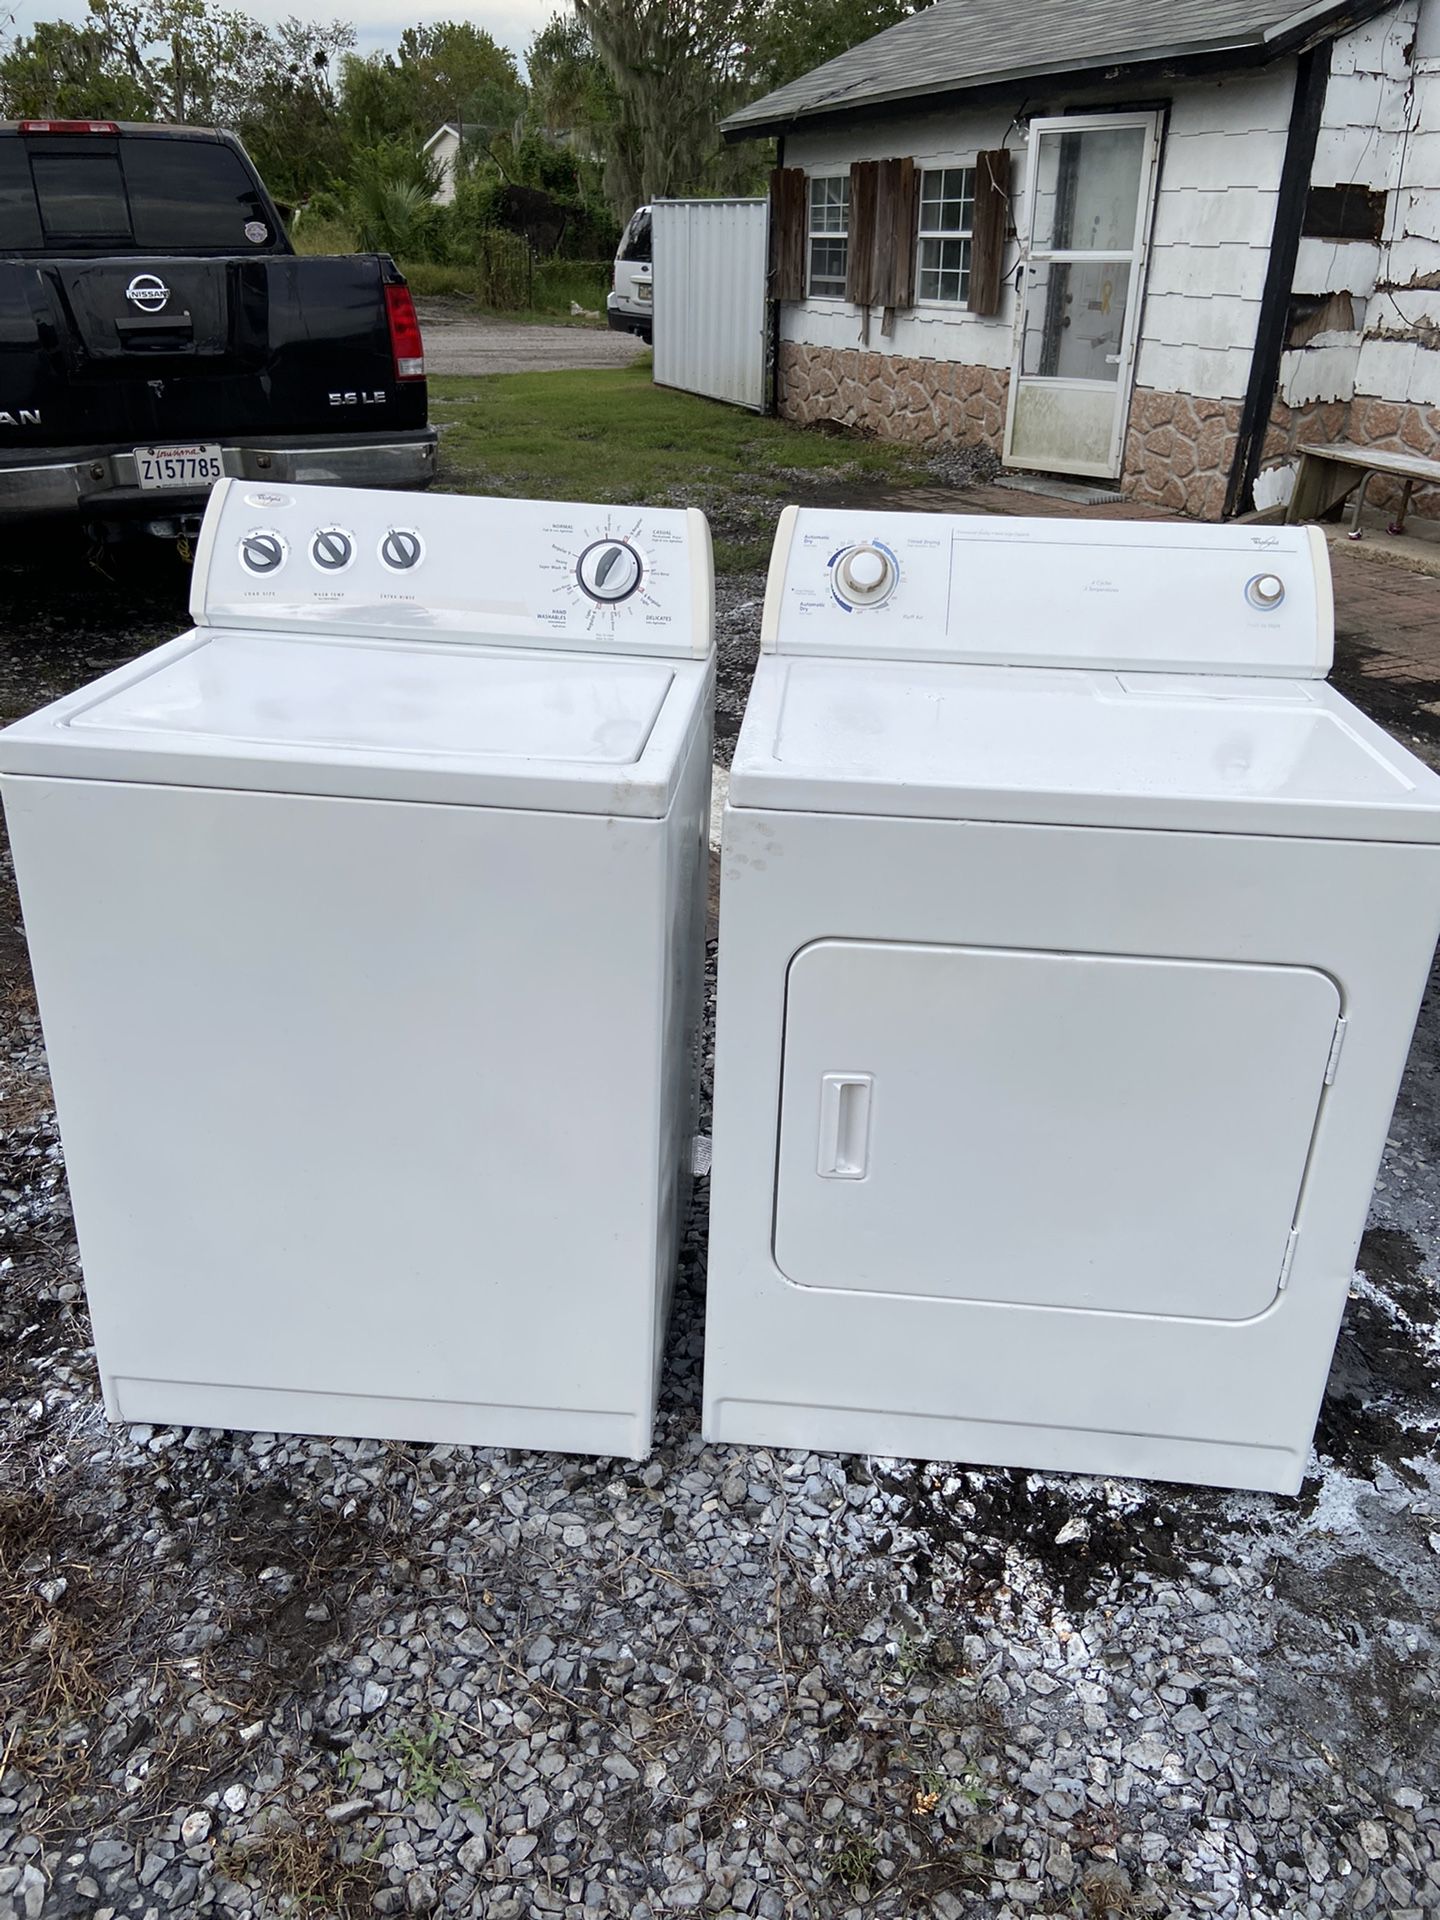 WILL DELIVER FOR FEE! WHIRLPOOL WASHER & ELECTRIC DRYER SET! BOTH RUN LIKE NEW! BOTH ARE WHIRLPOOLS. EVERYTHING ON BOTH WORK PERFECTLY! THEY BOTH BEEN